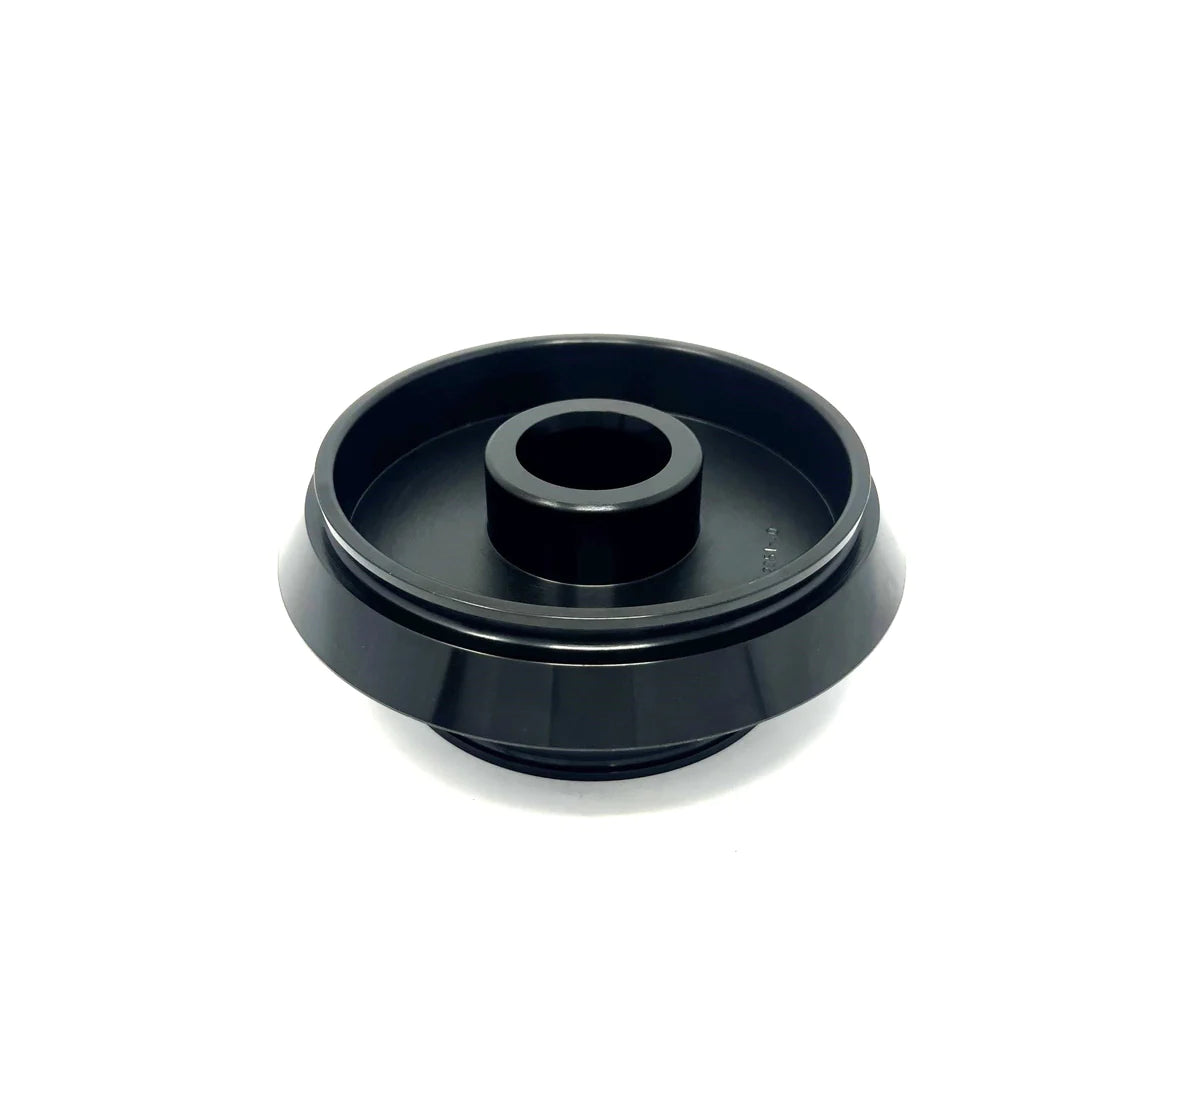 Dual-sided Truck Collet/Cone. Range: 4.72" to 6.85" - 28mm bore